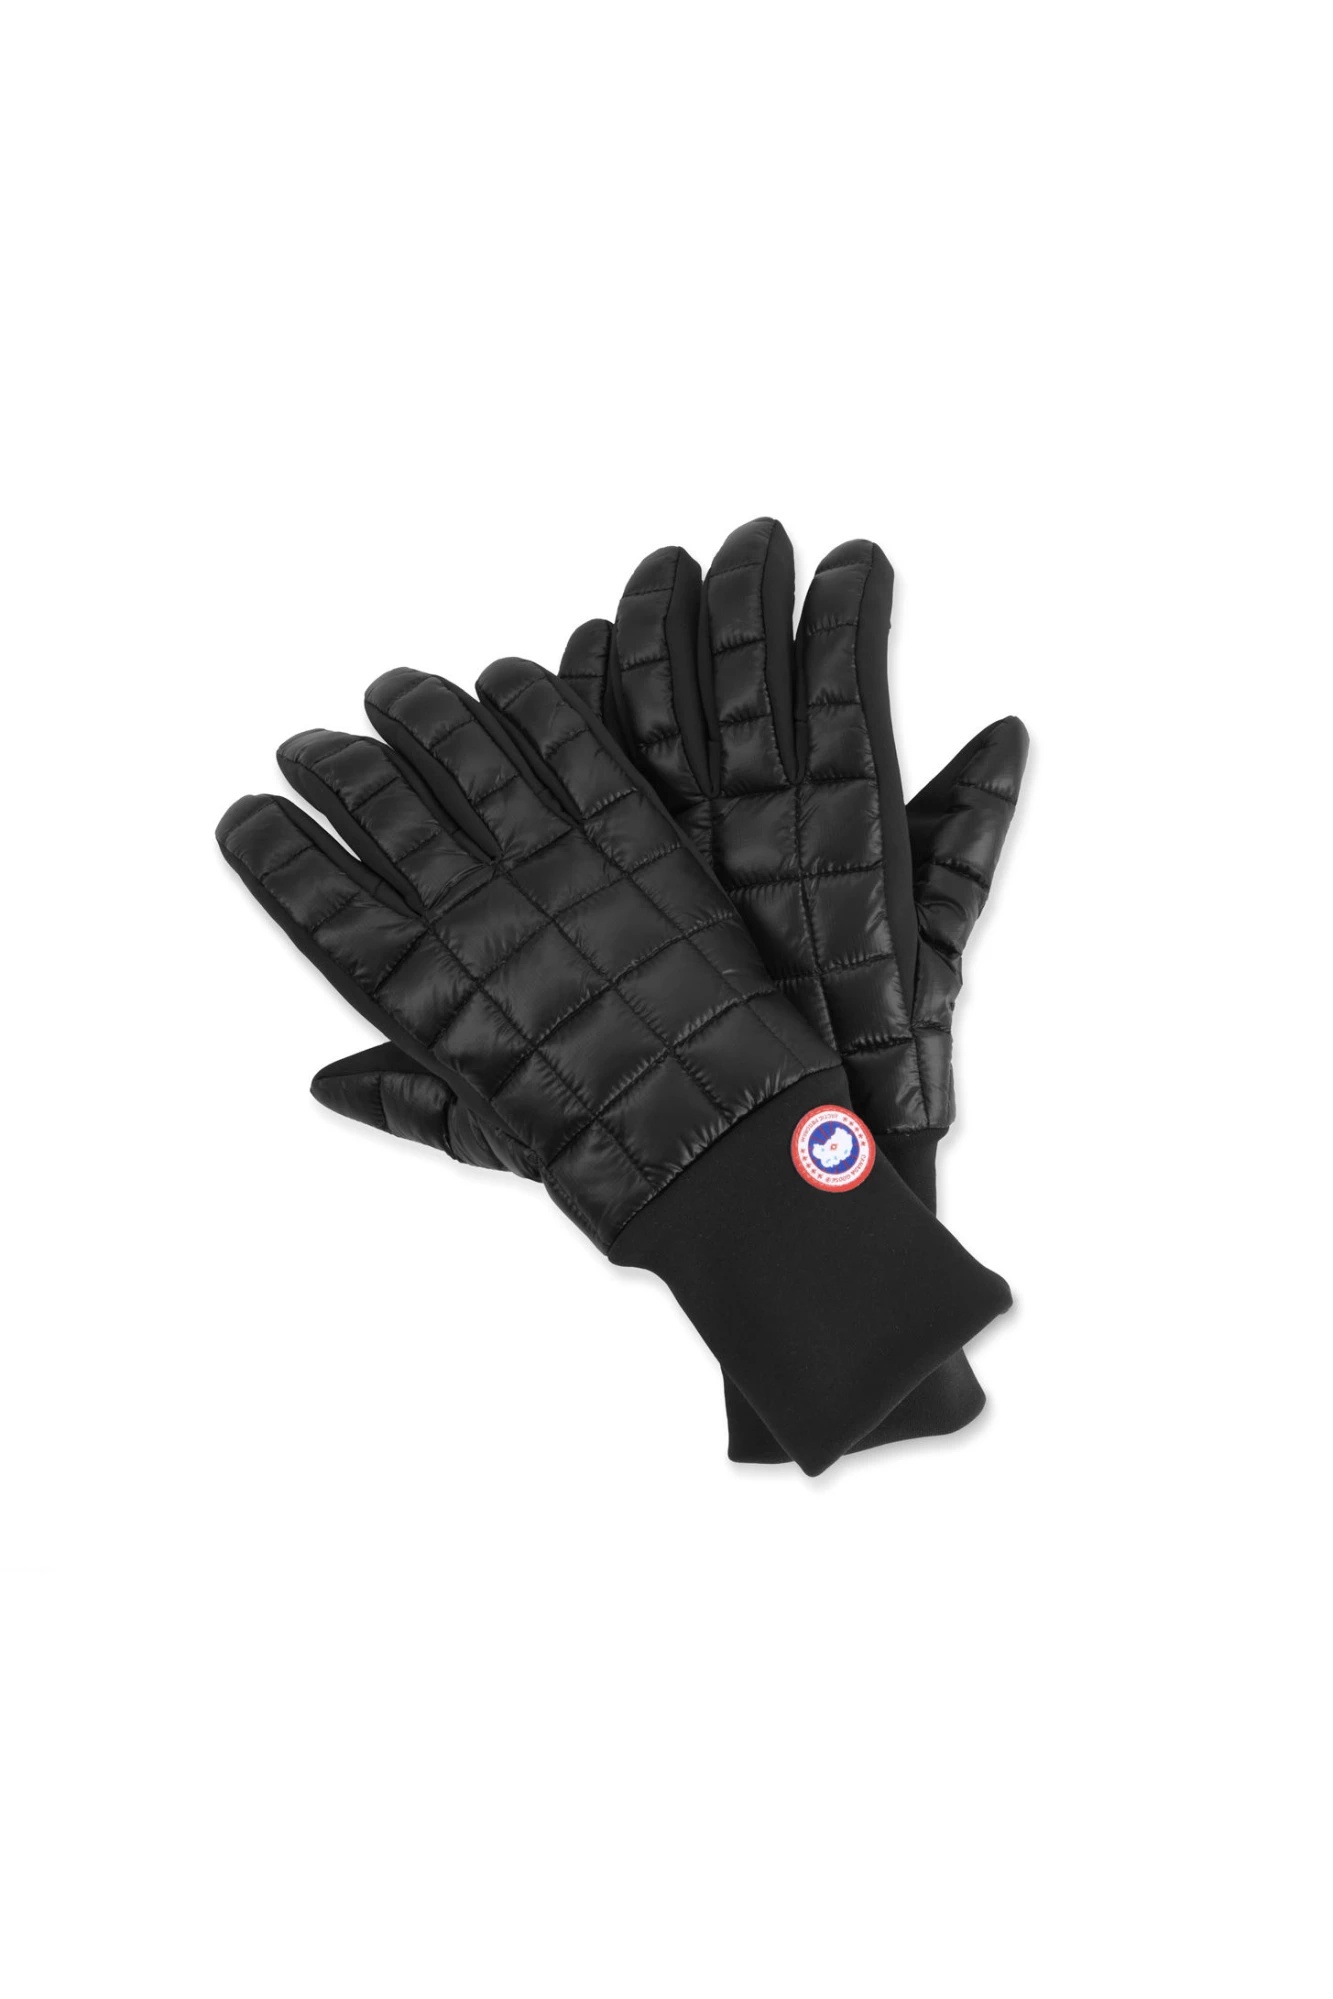 NORTHERN GLOVE LINERS - 1